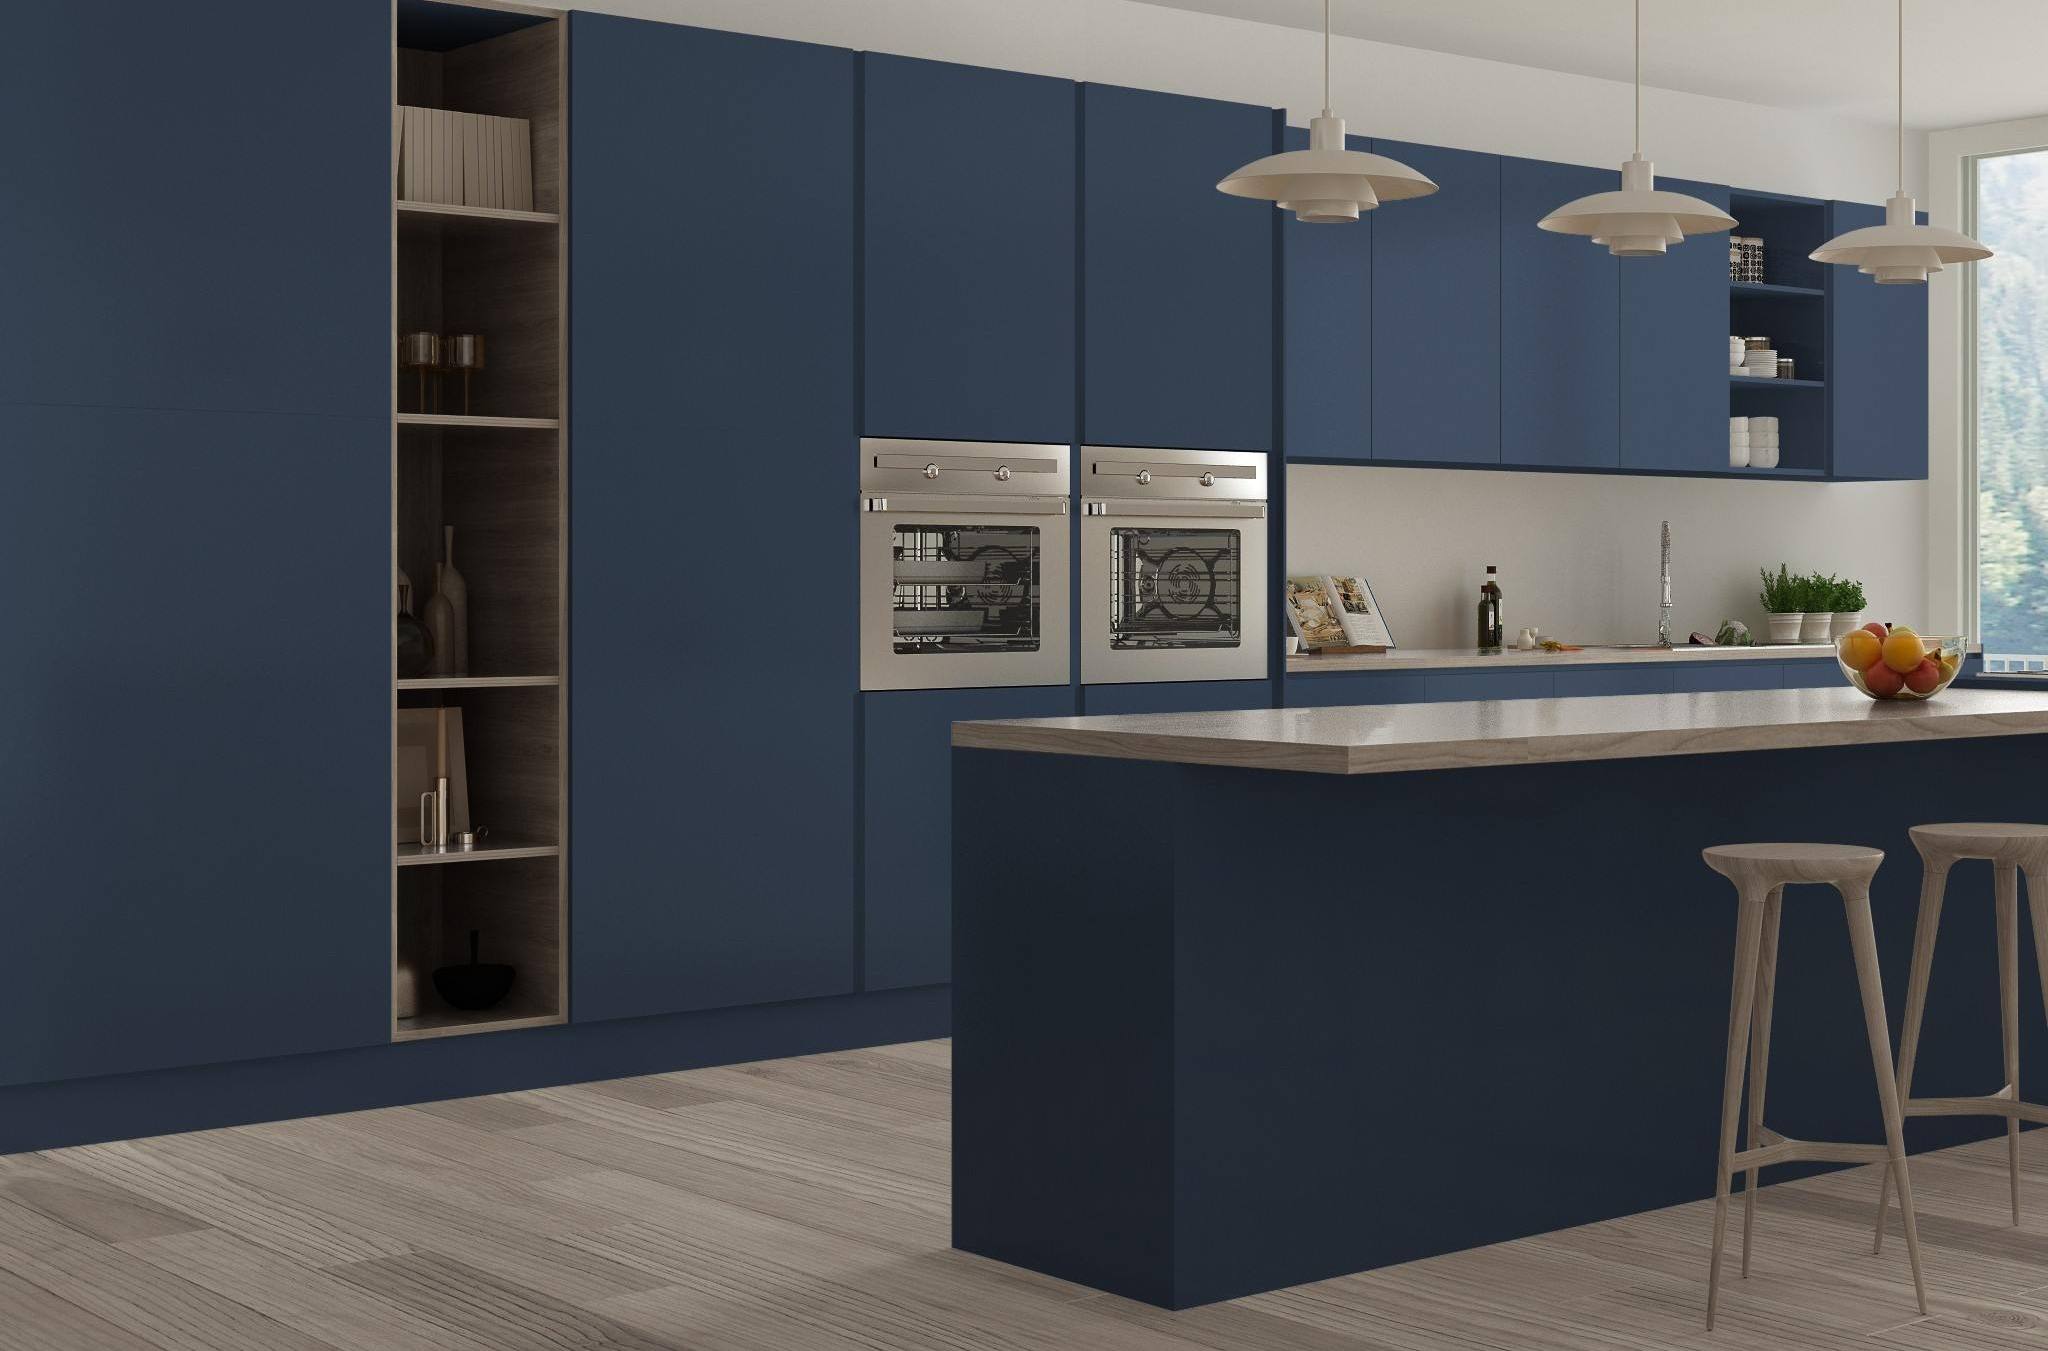 8 Top Kitchen Color Trends in 2023